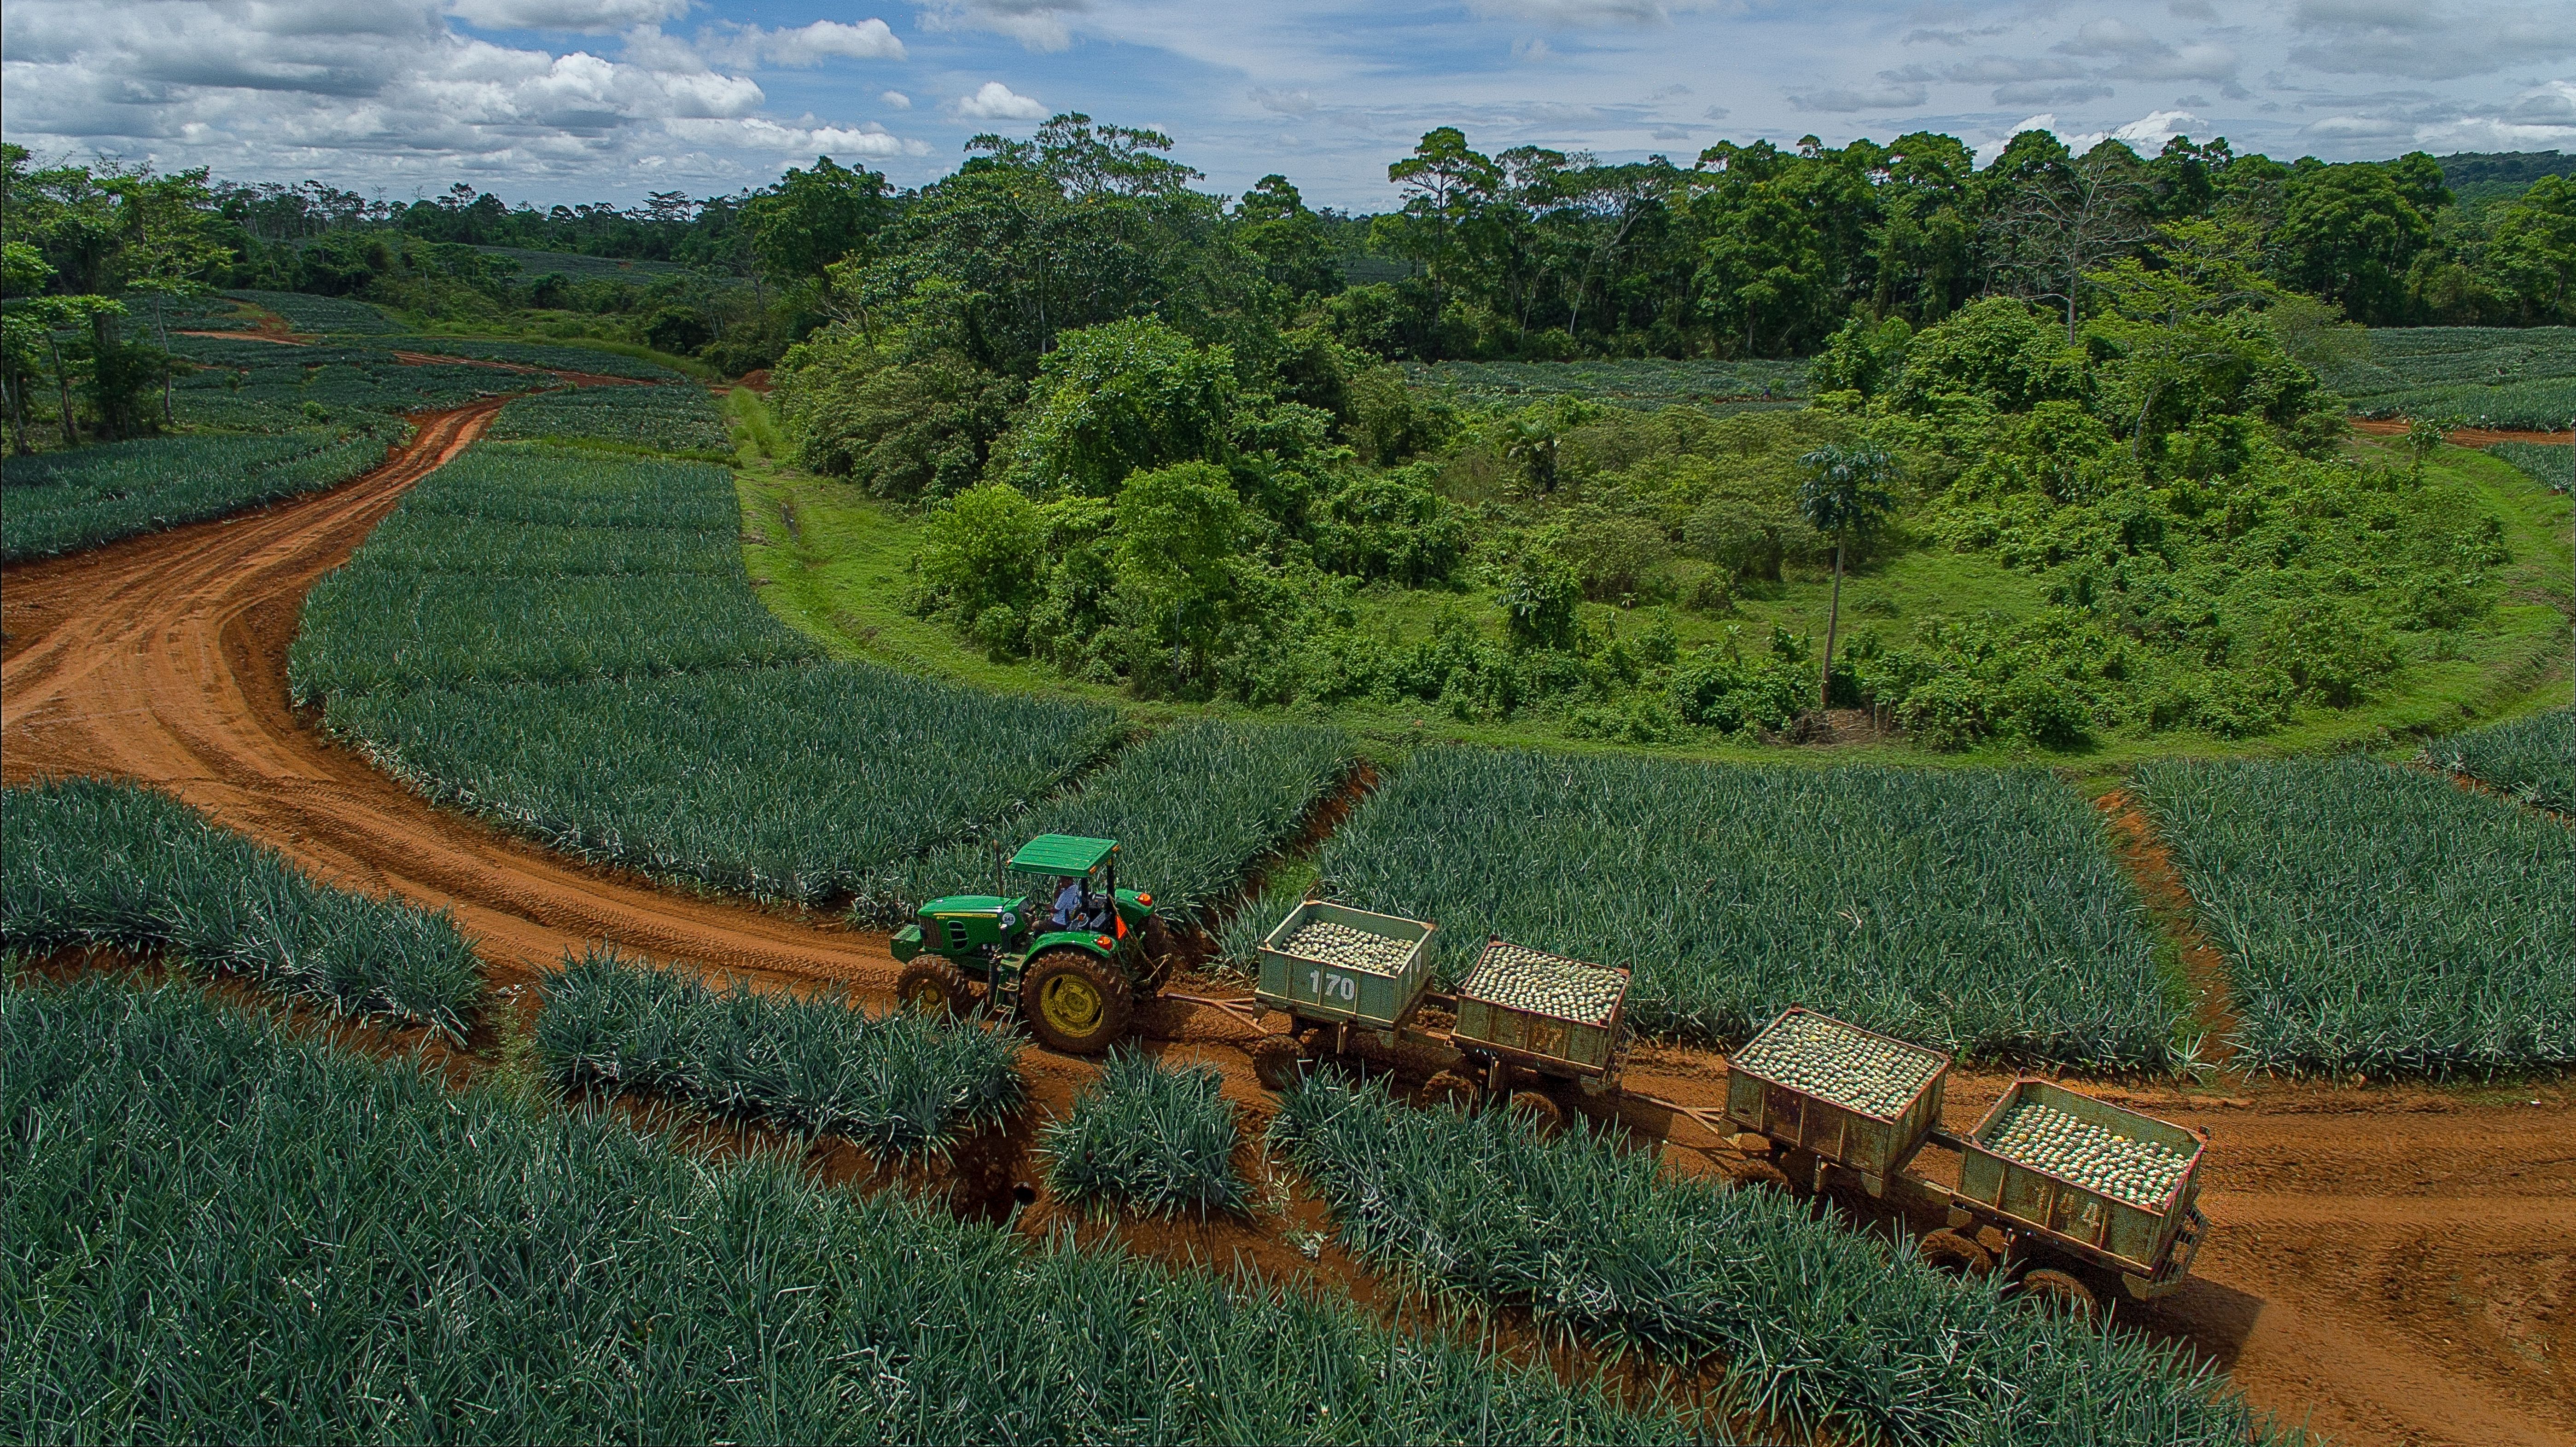 Upala Agrícola: How a pineapple farm thrives towards sustainable production  | Preferred by Nature | global